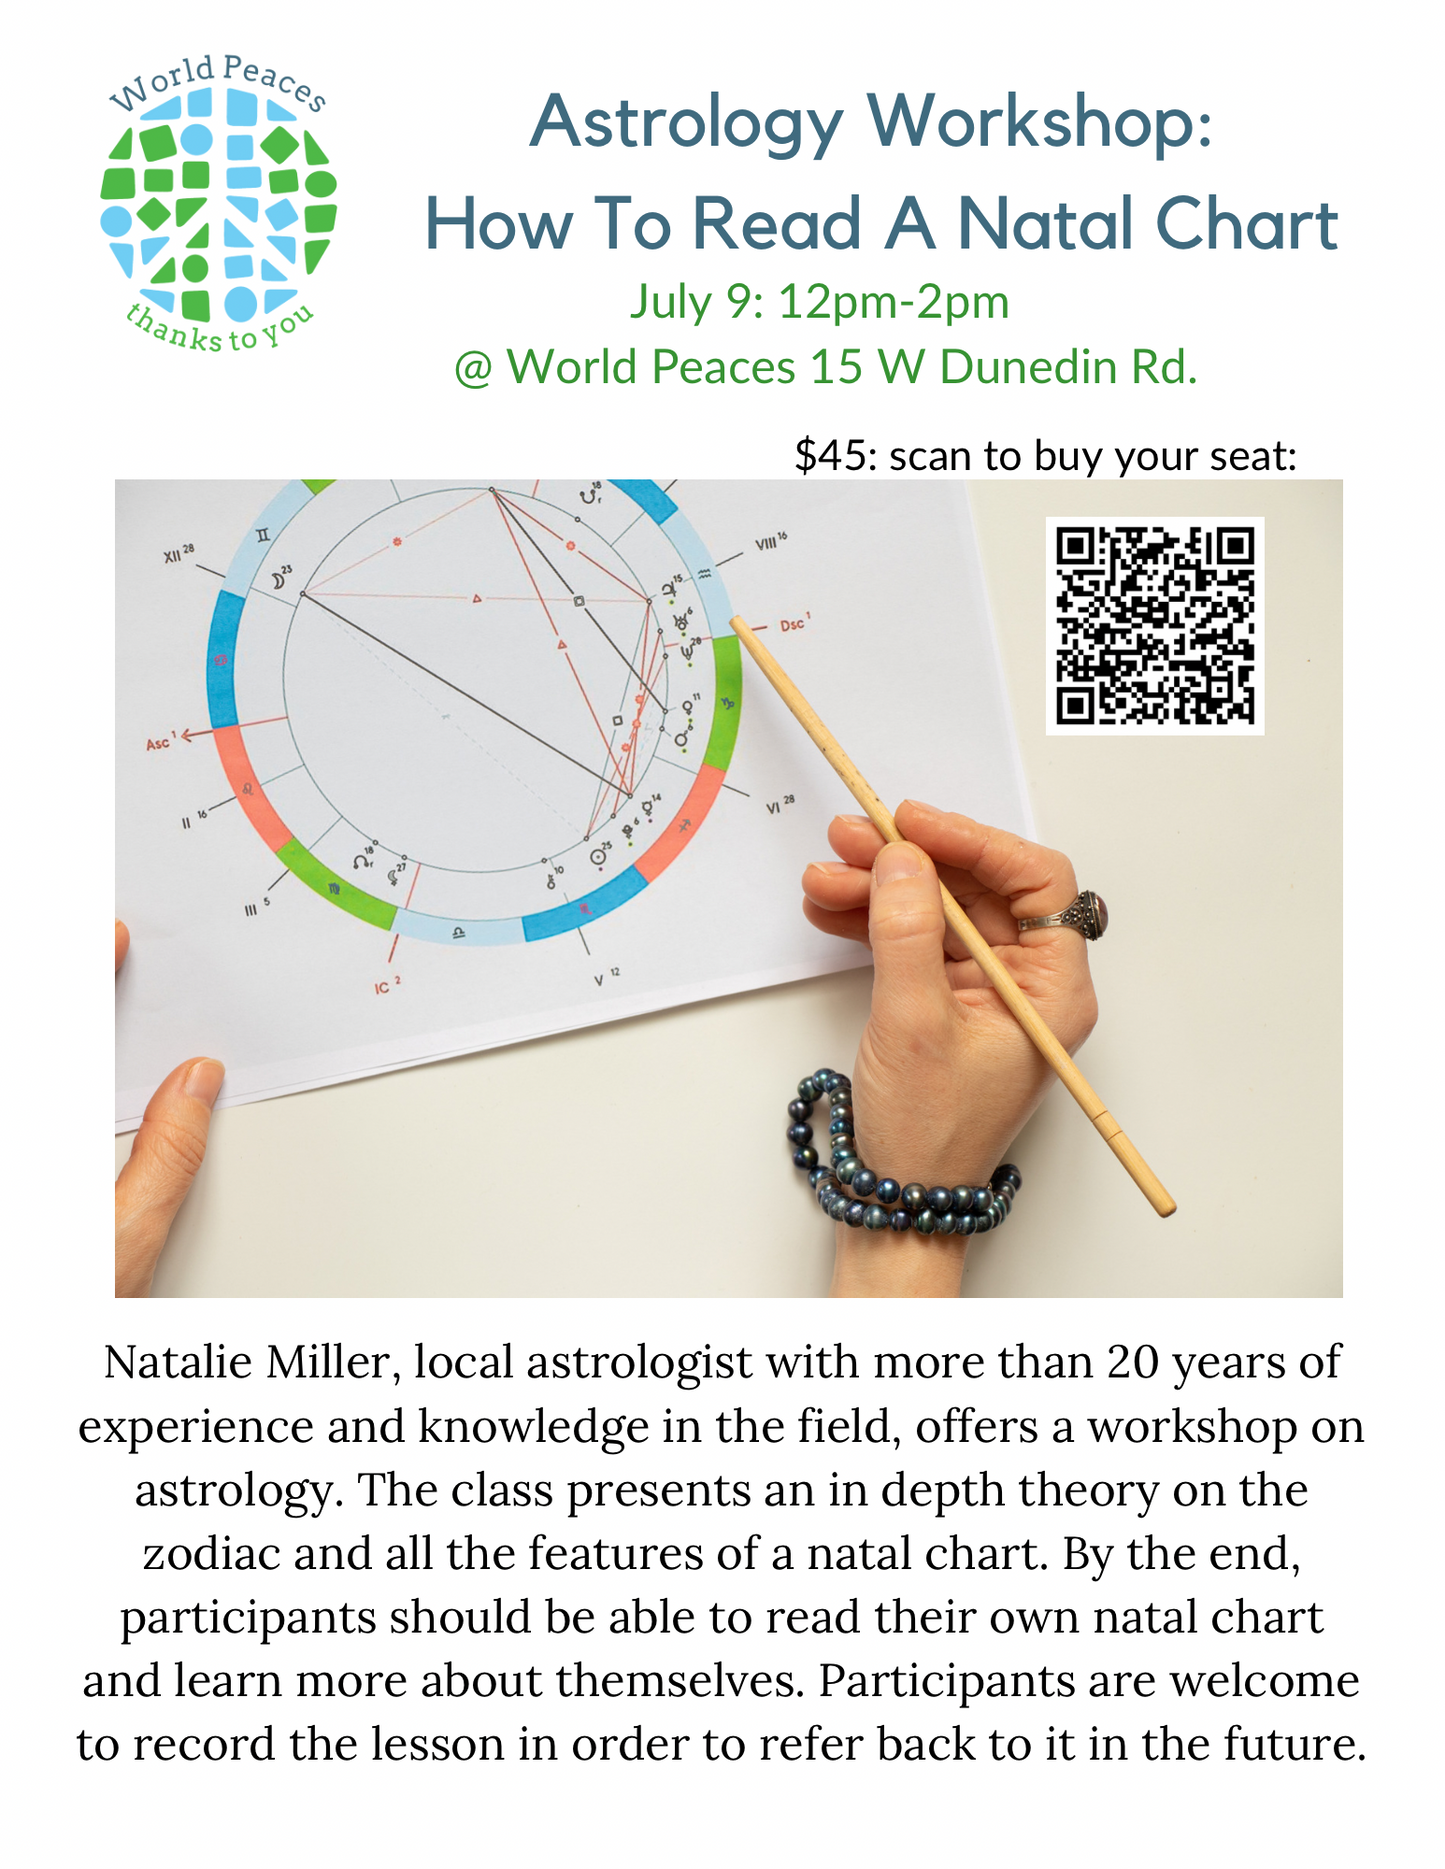 Astrology Workshop: How To Read A Natal Chart